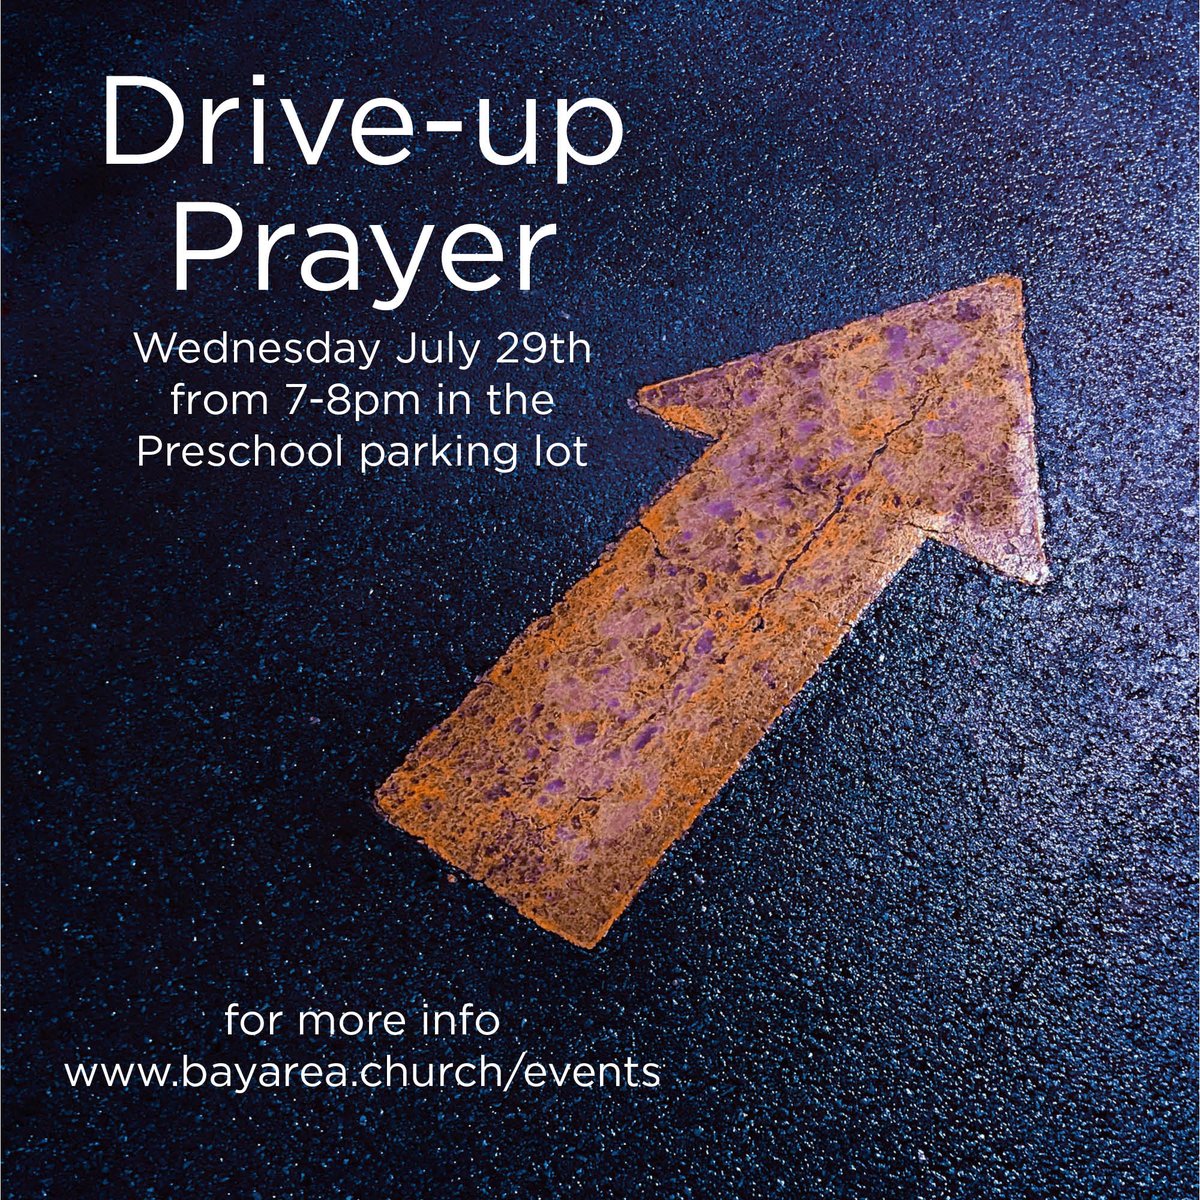 Need prayer? Then join us for an evening of DRIVE-UP PRAYER! Stay in your vehicle and one of our team members will gladly assist you with prayer at your window. Our team will be wearing masks and will be practicing social distancing. More info at bayarea.church/events